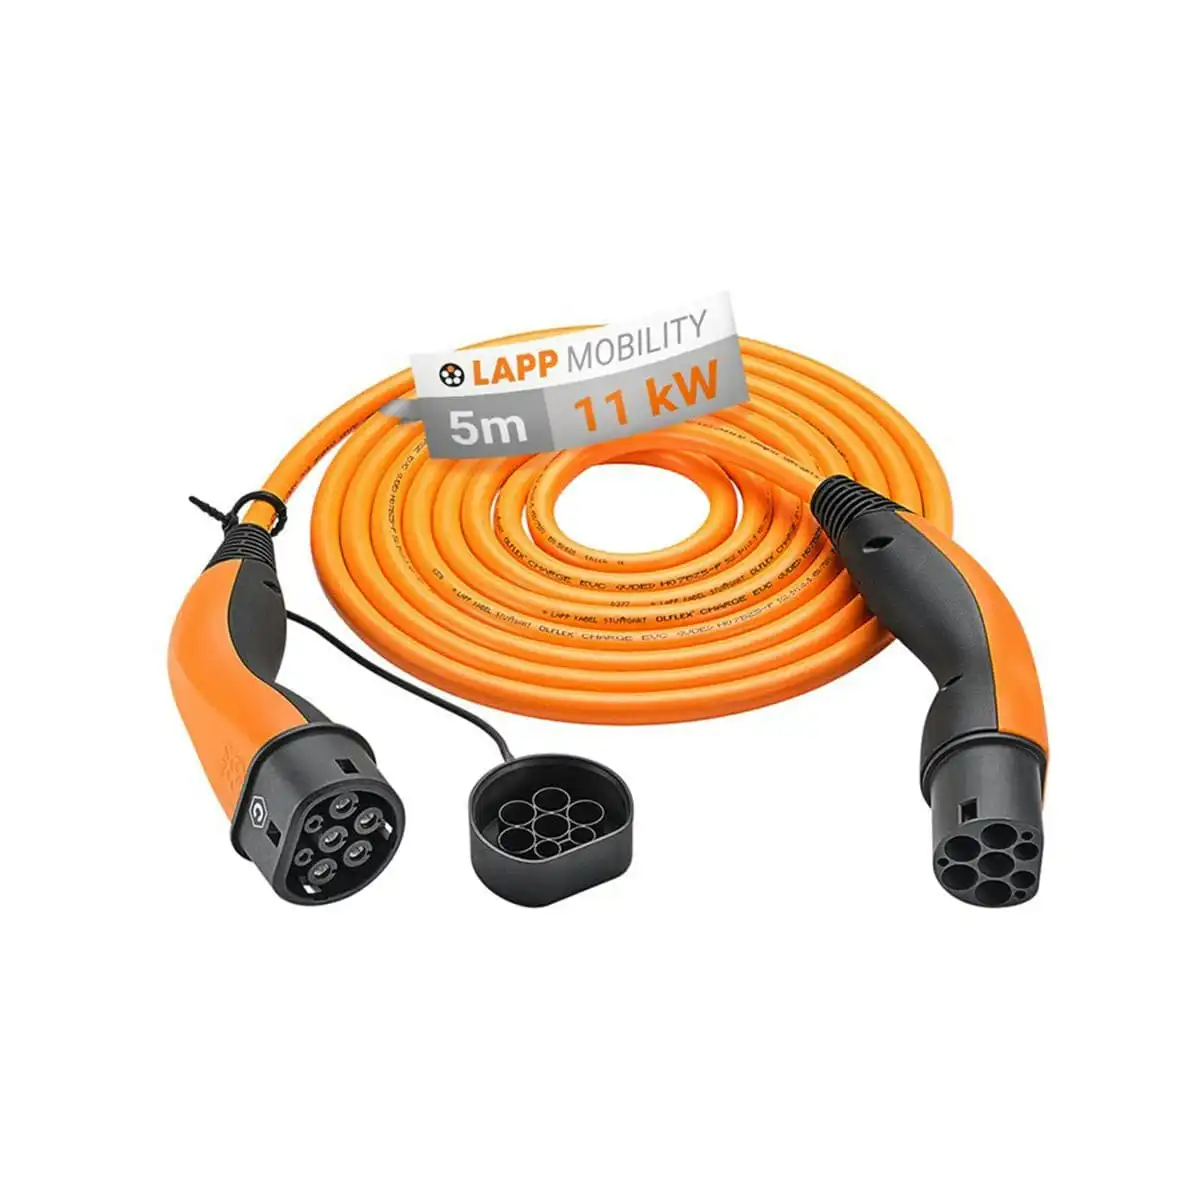 LAPP EV Helix Charge Cable Type 2 (11kW-3P-20A) 5m for Hybrid and Electric Cars - Orange